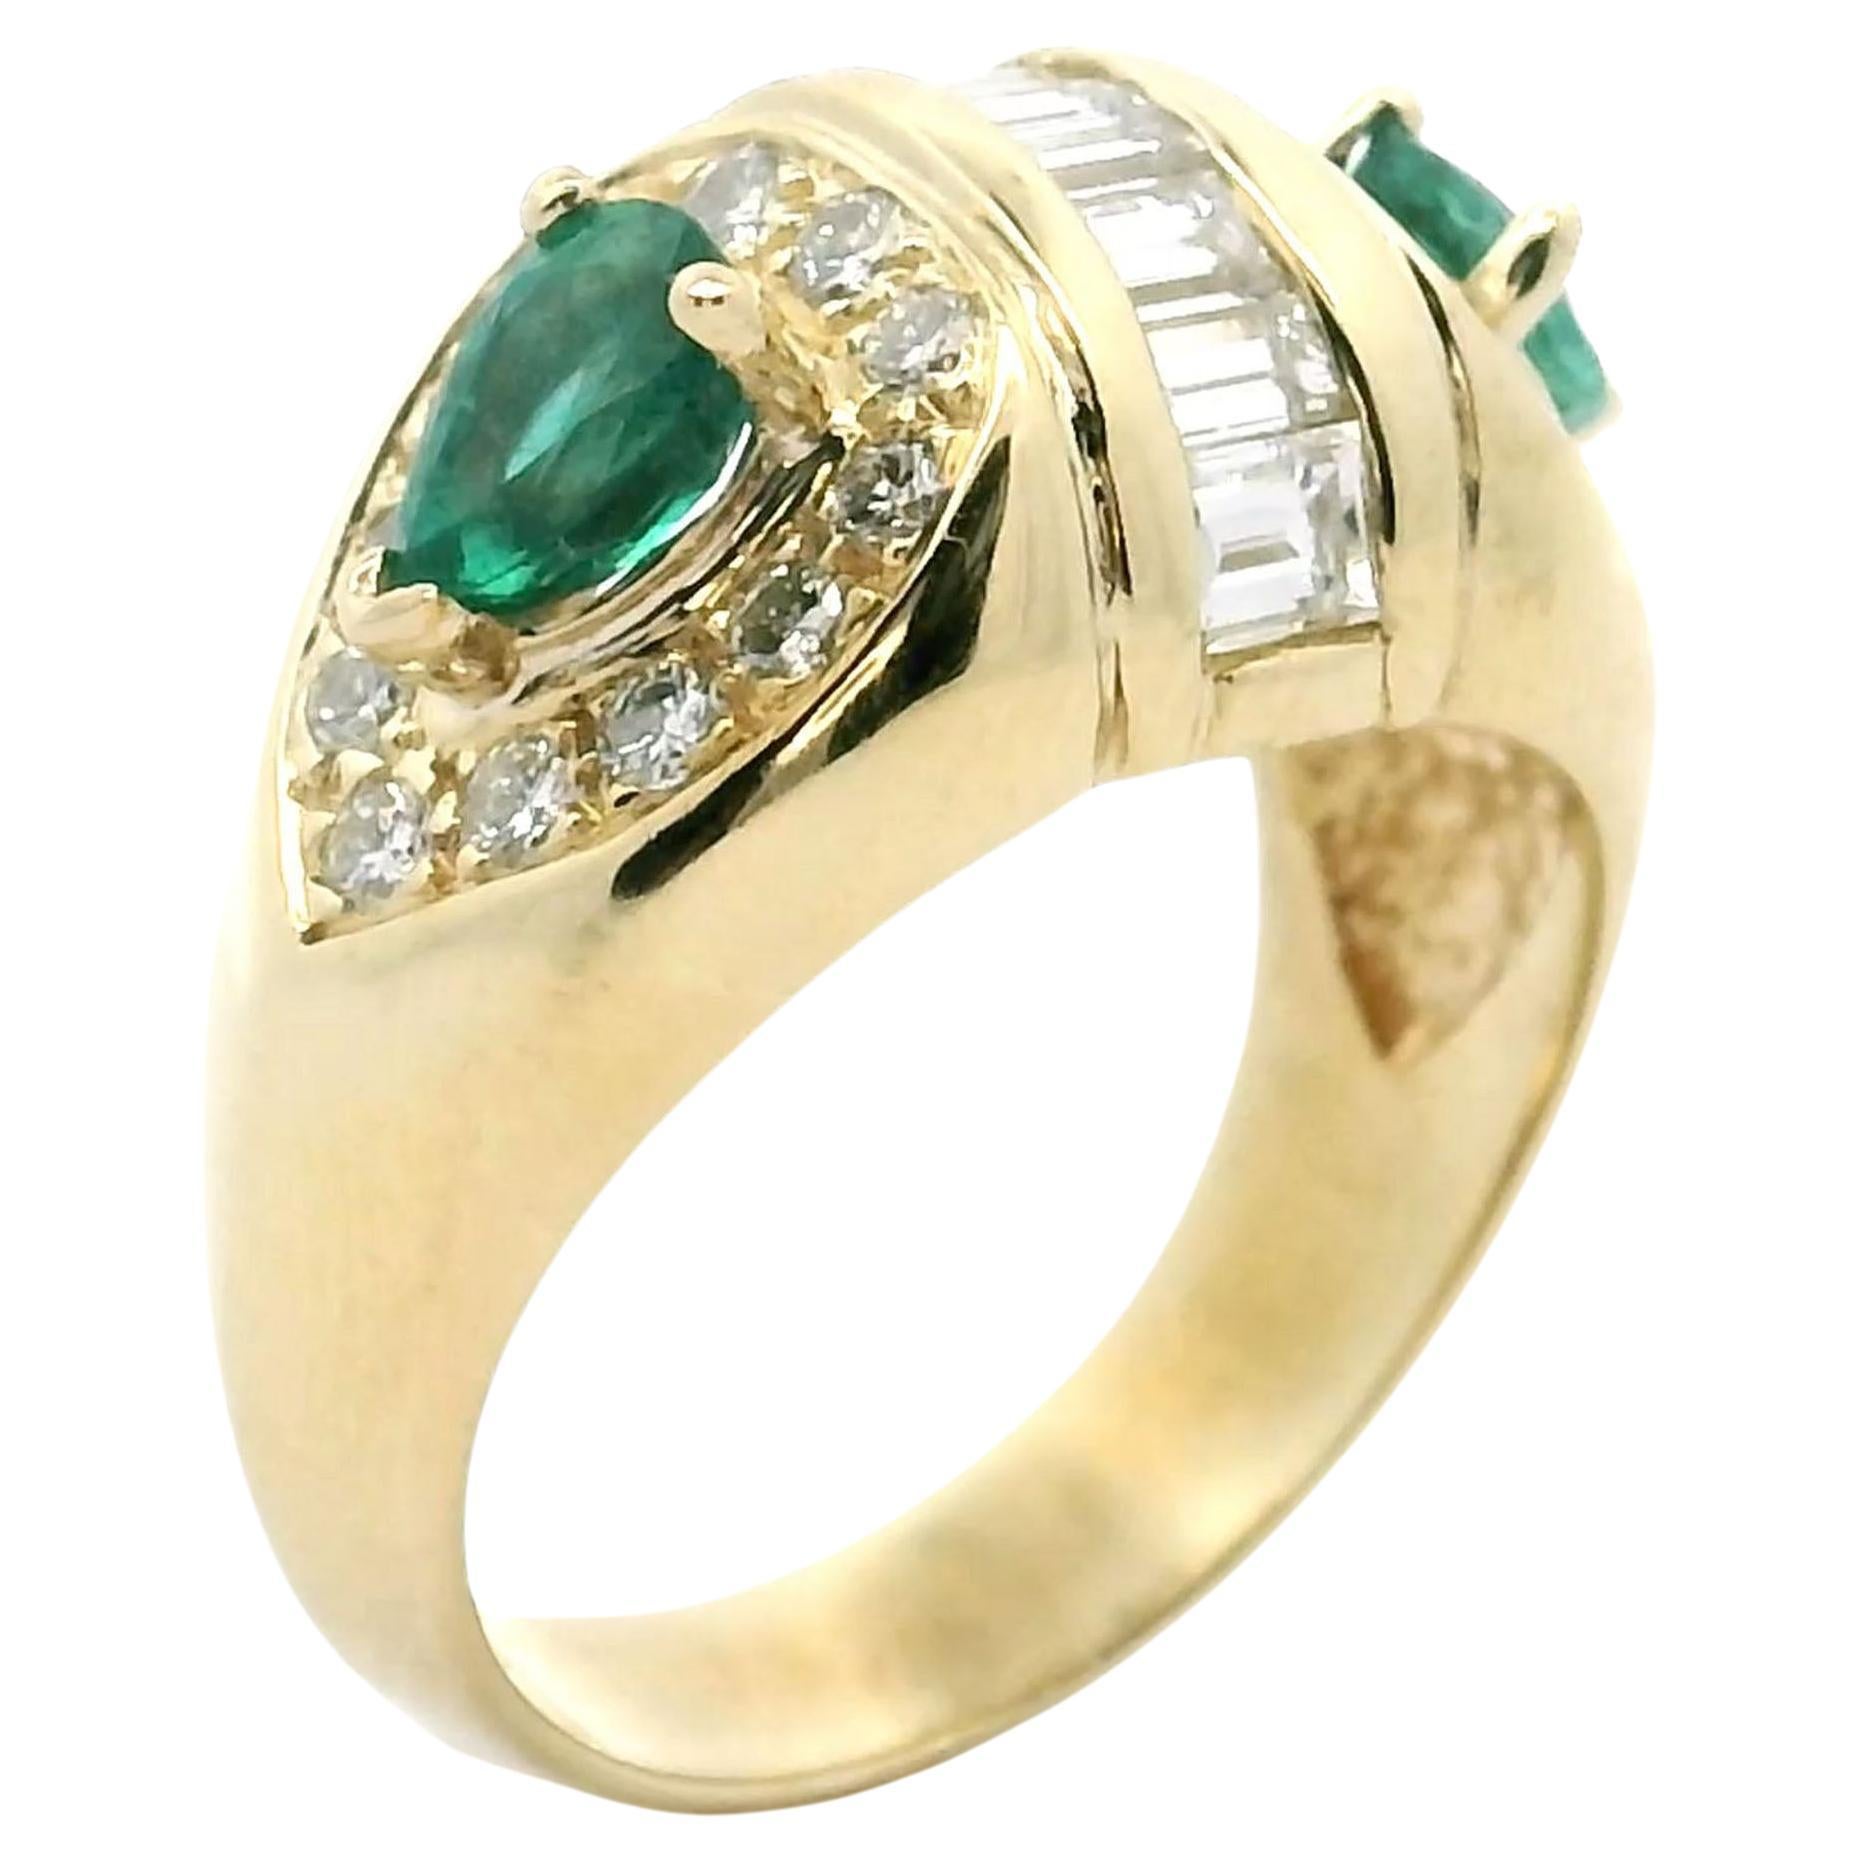 Vintage Emerald Ring with Diamonds Set in 18K Gold - Circa 1985 For Sale